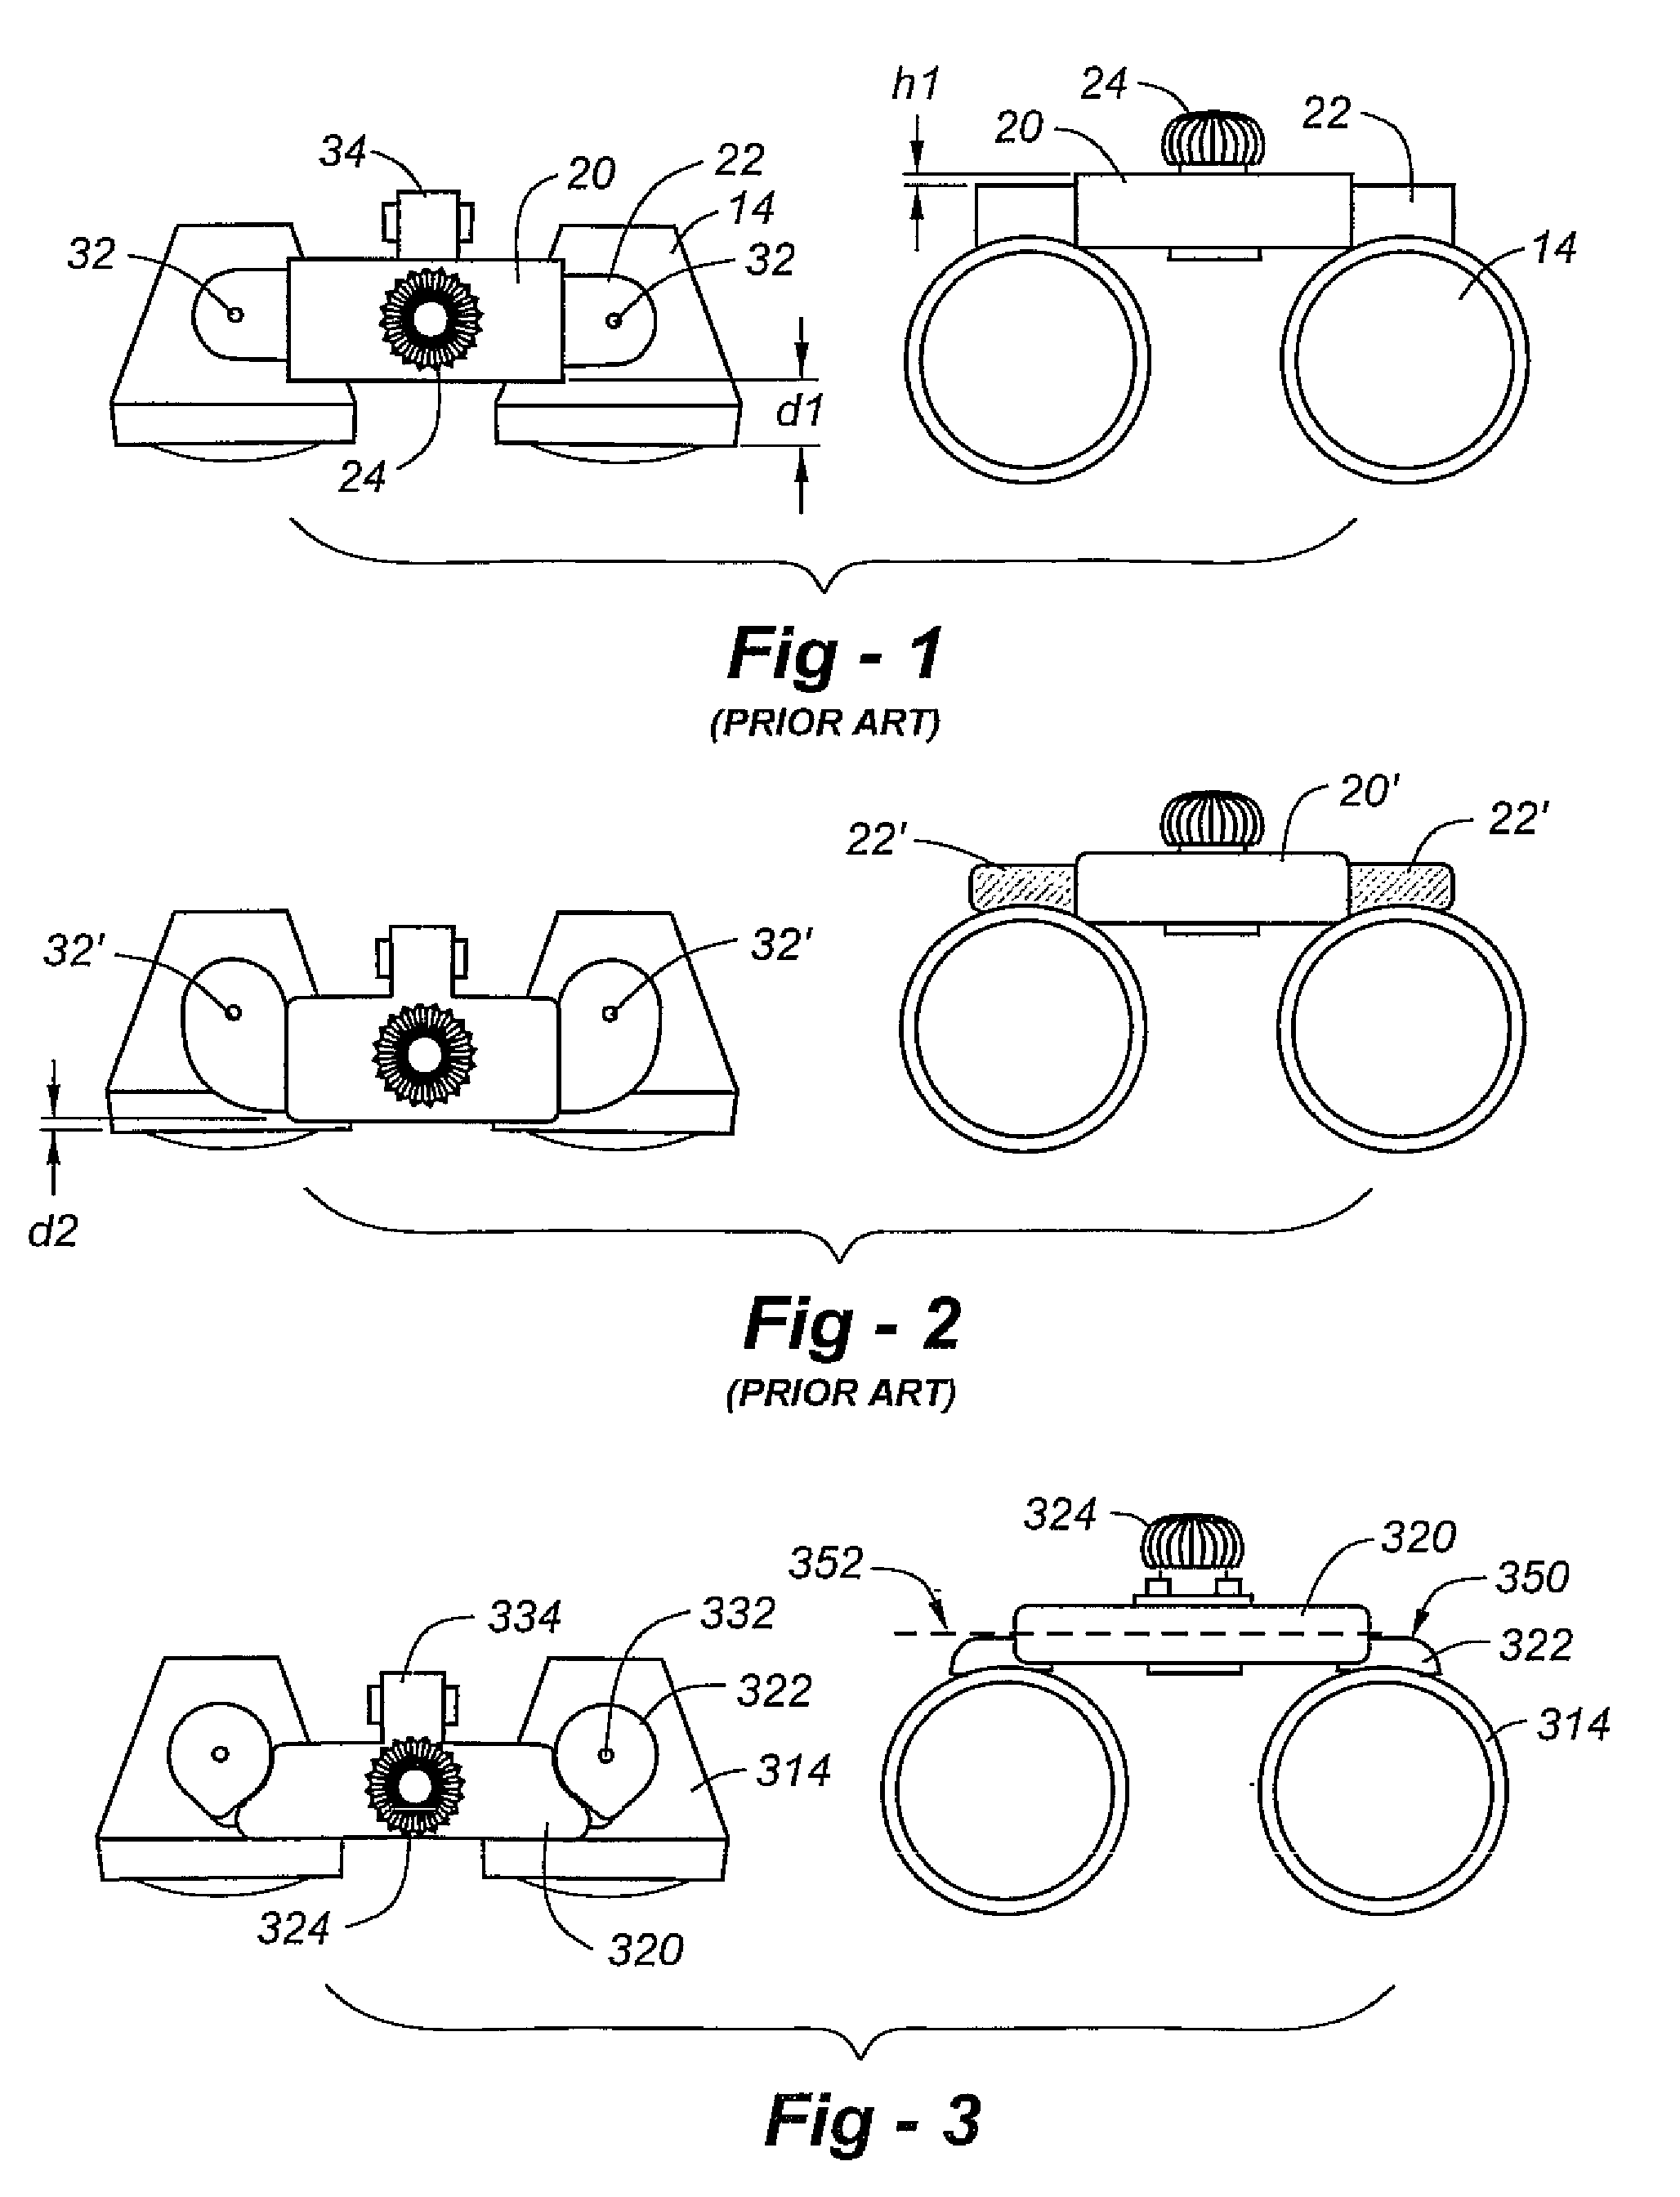 Low-profile optical mounting assembly